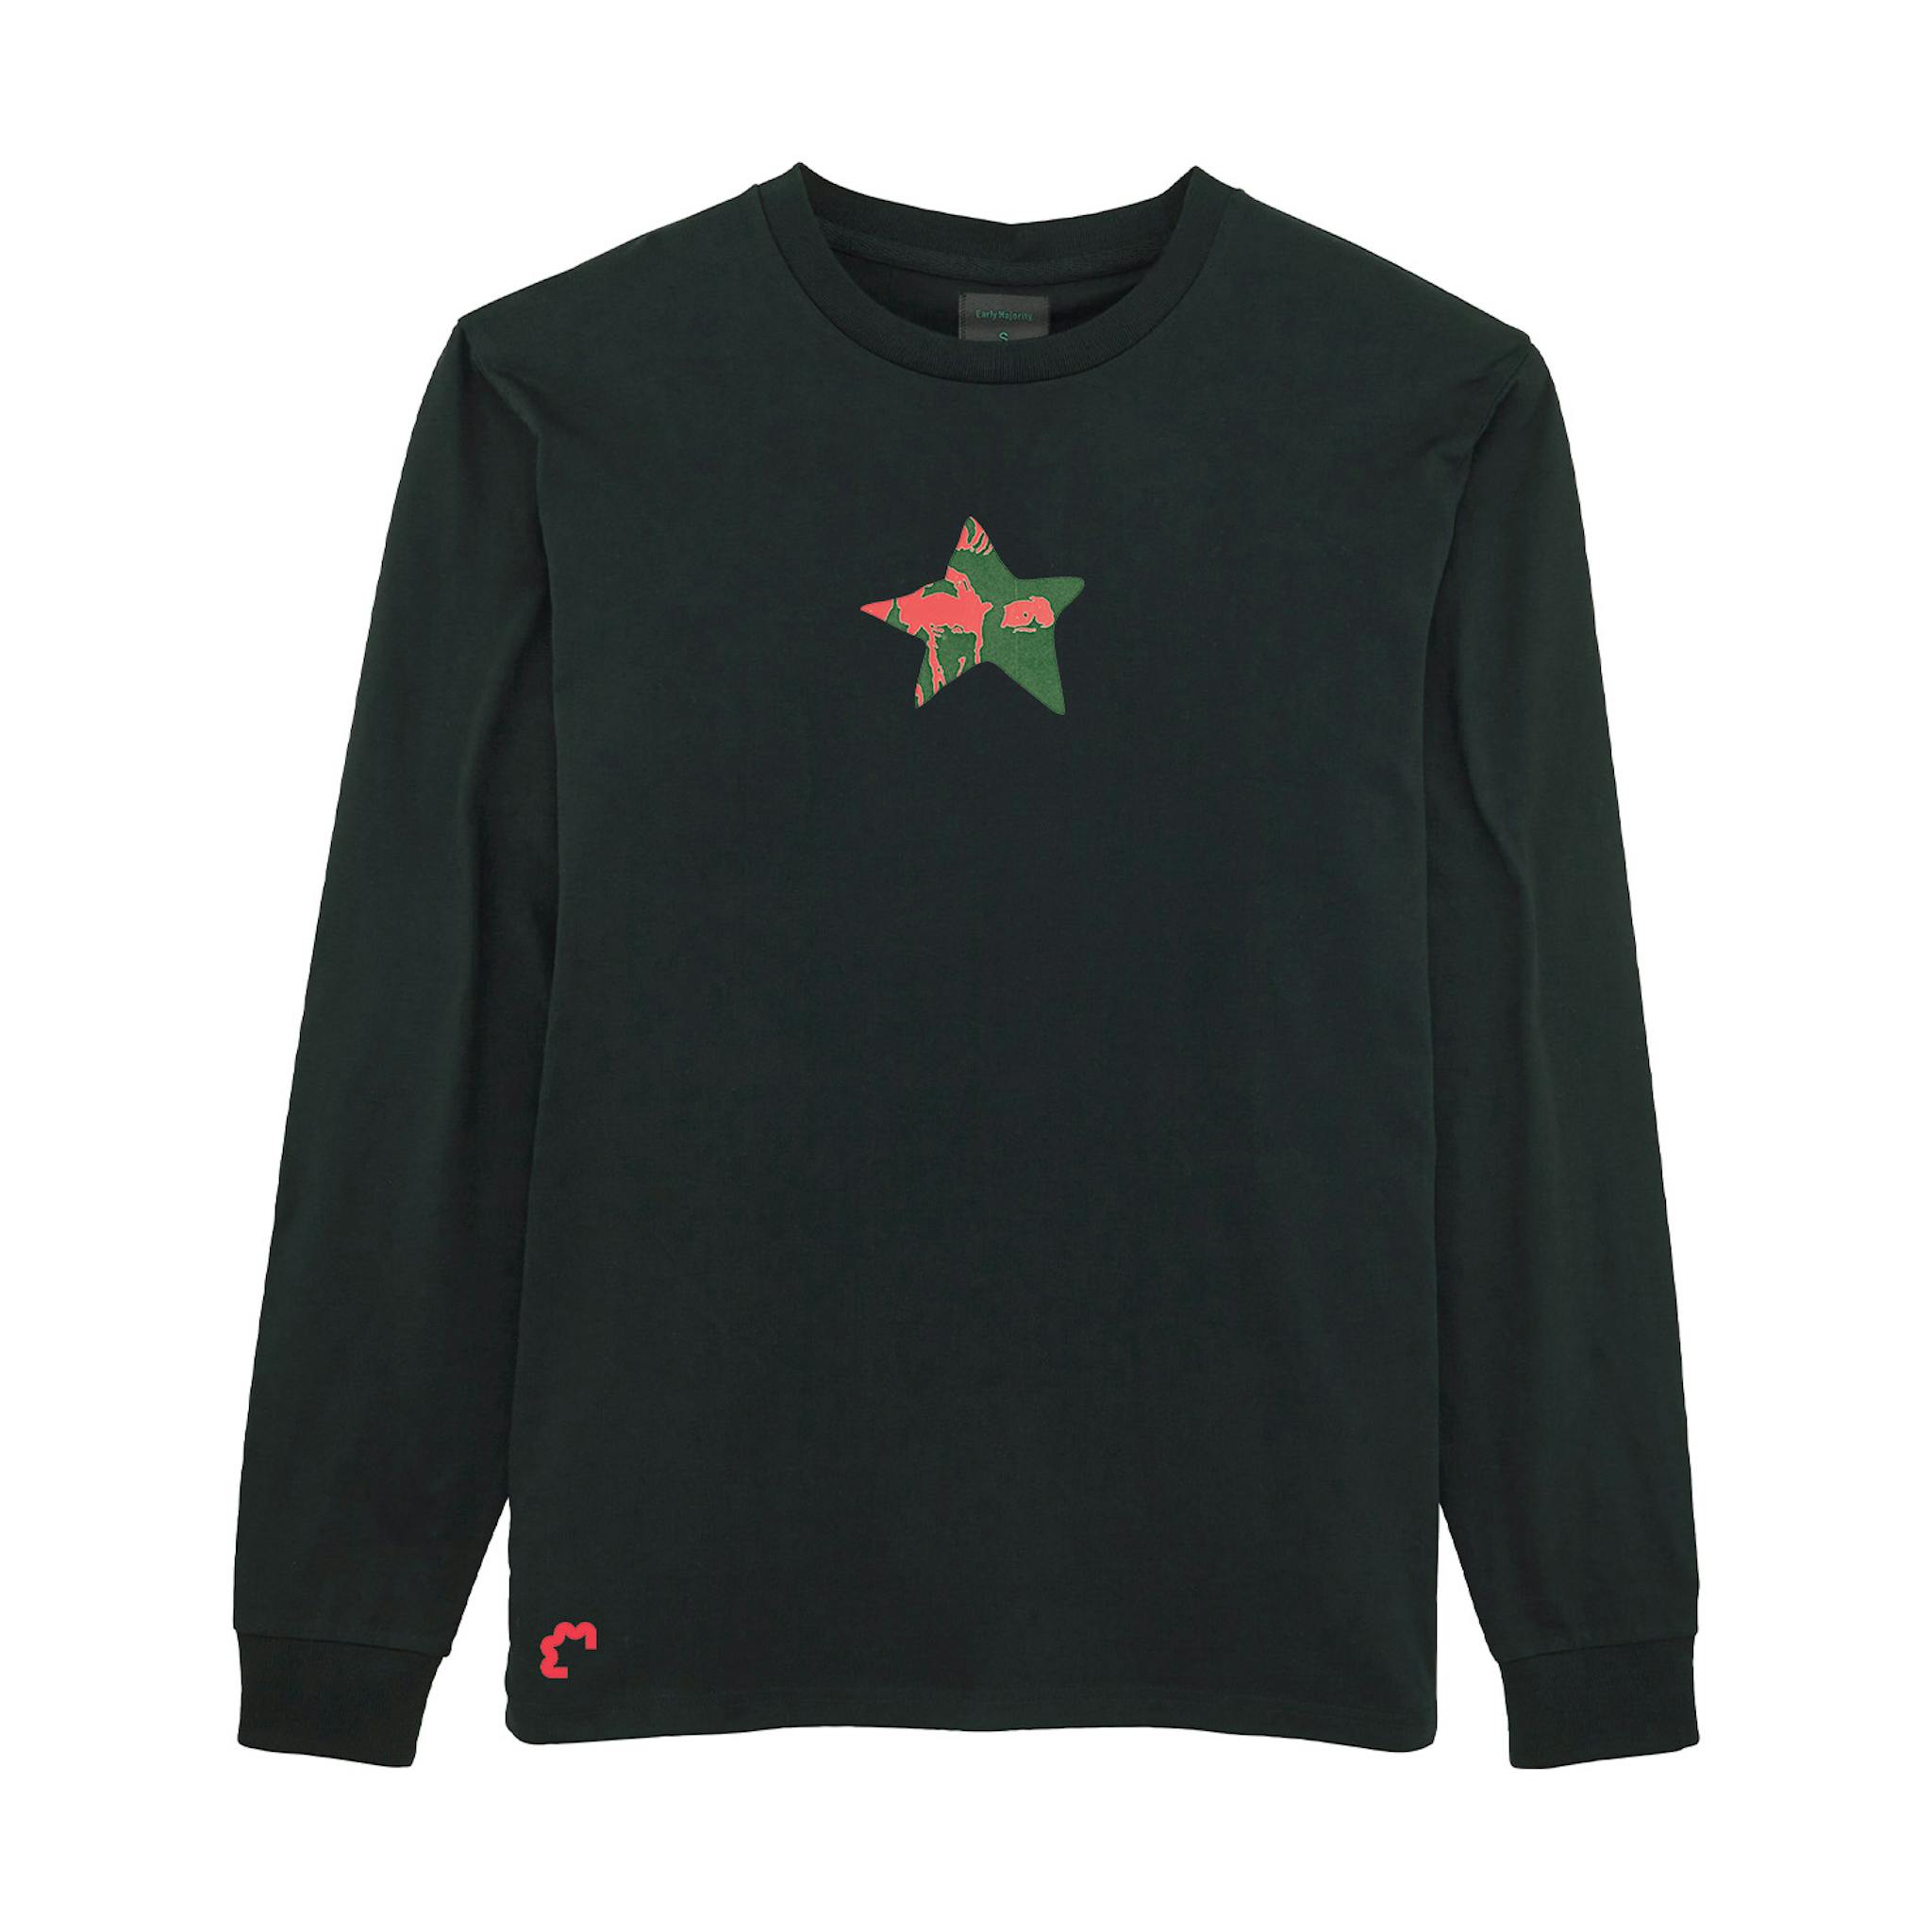 A black long-sleeve T-shirt with a small graphic of a red and green star on the chest.